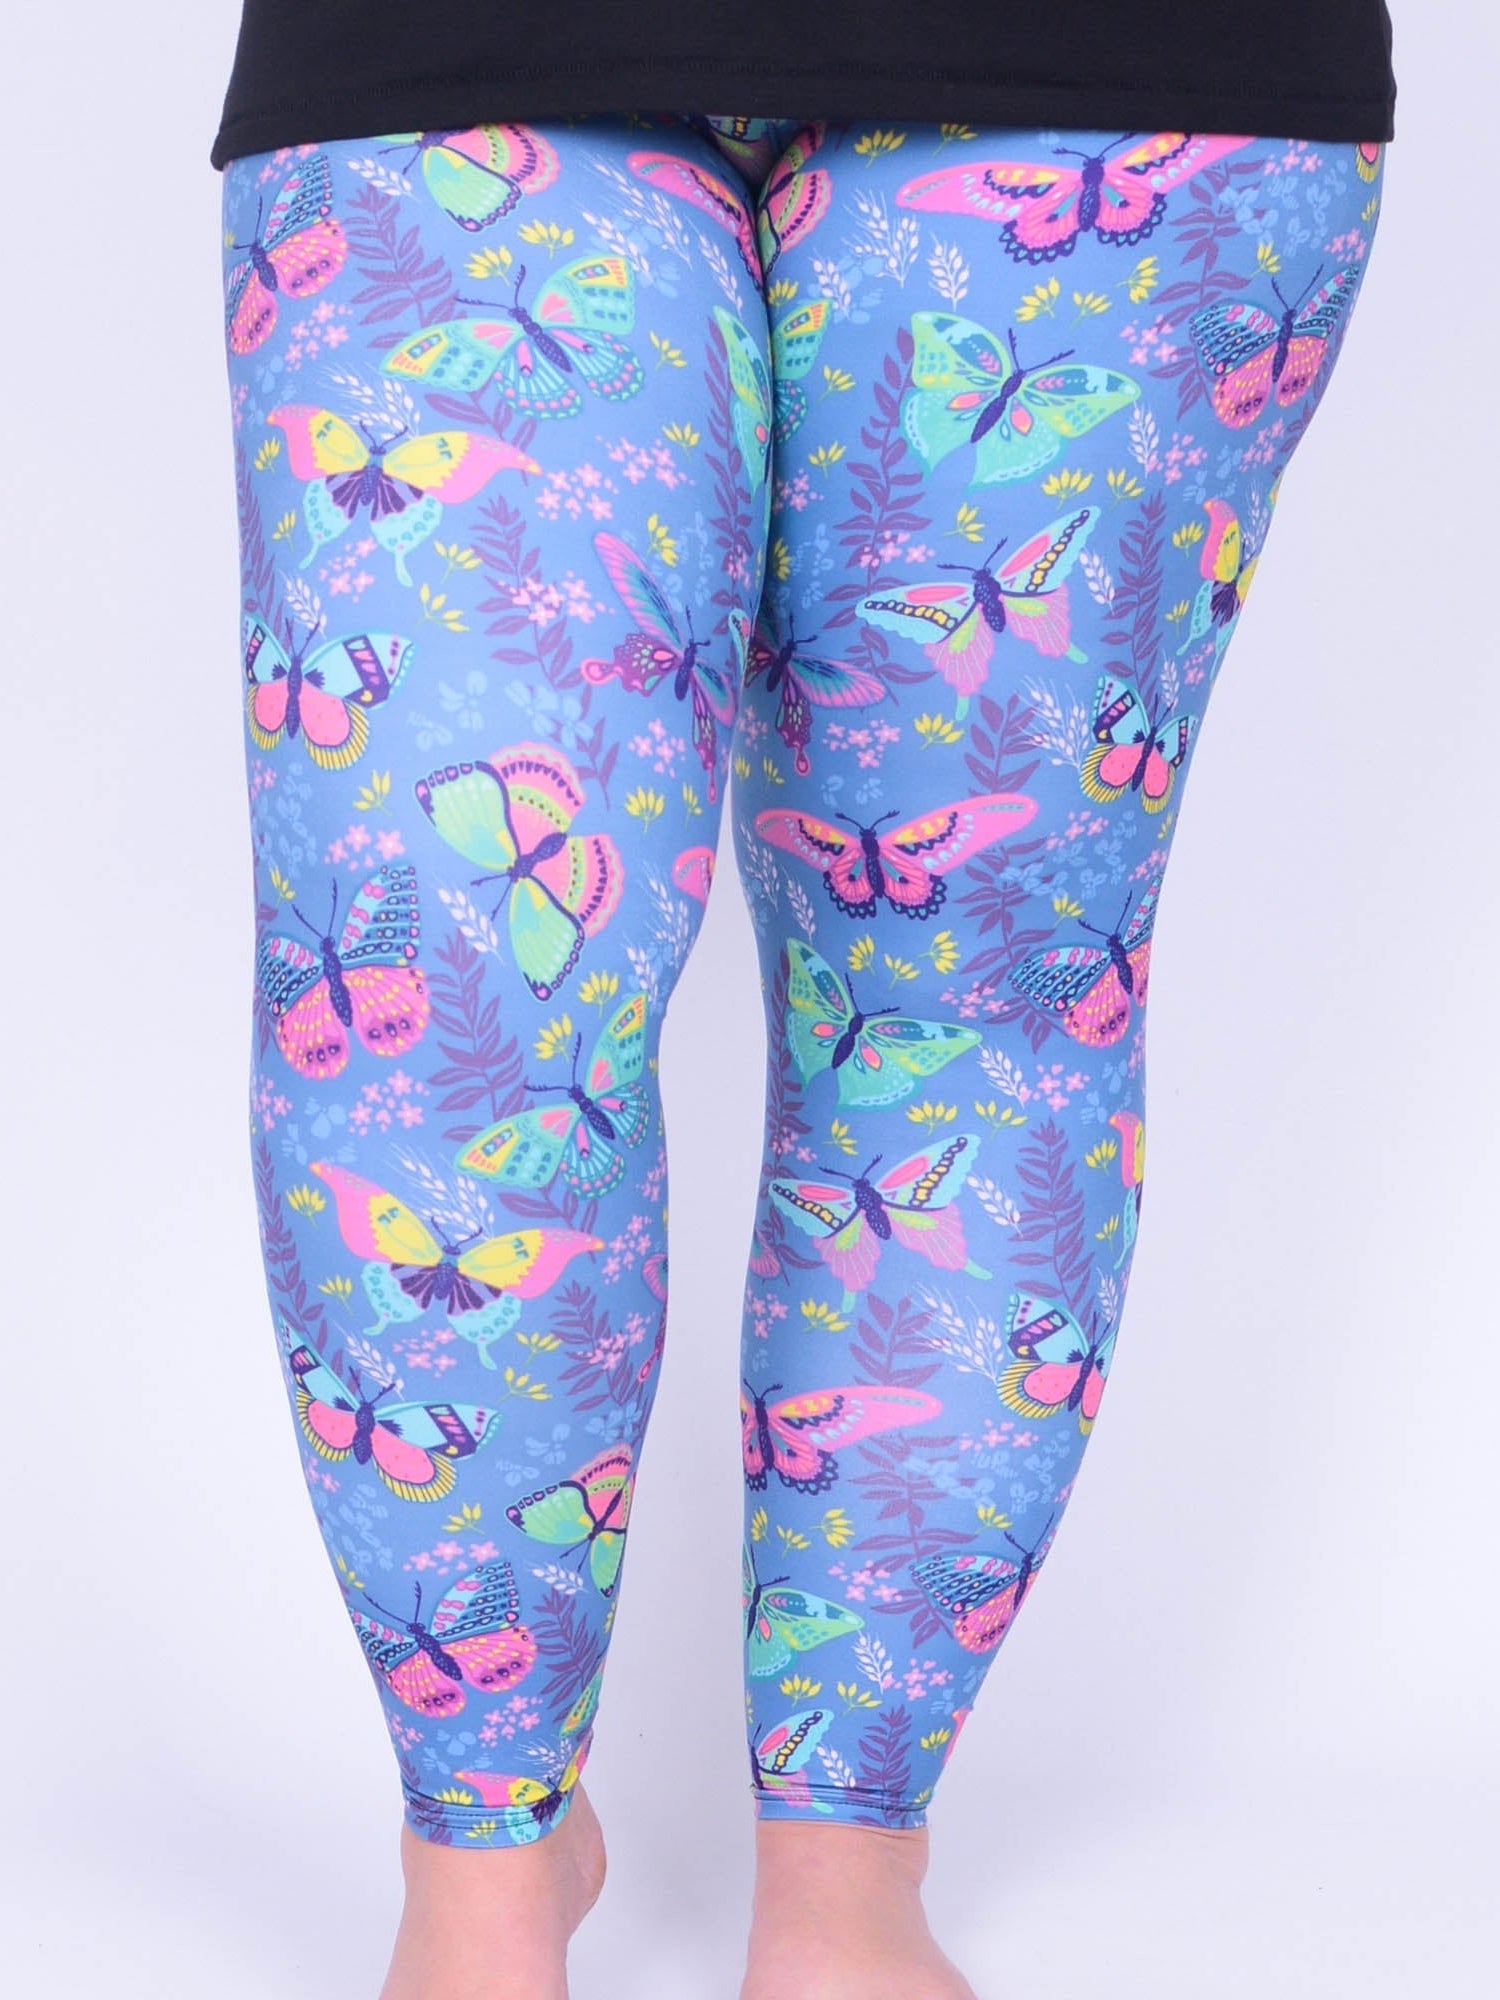 Leggings - Butterflies - L5, Trousers, Pure Plus Clothing, Lagenlook Clothing, Plus Size Fashion, Over 50 Fashion